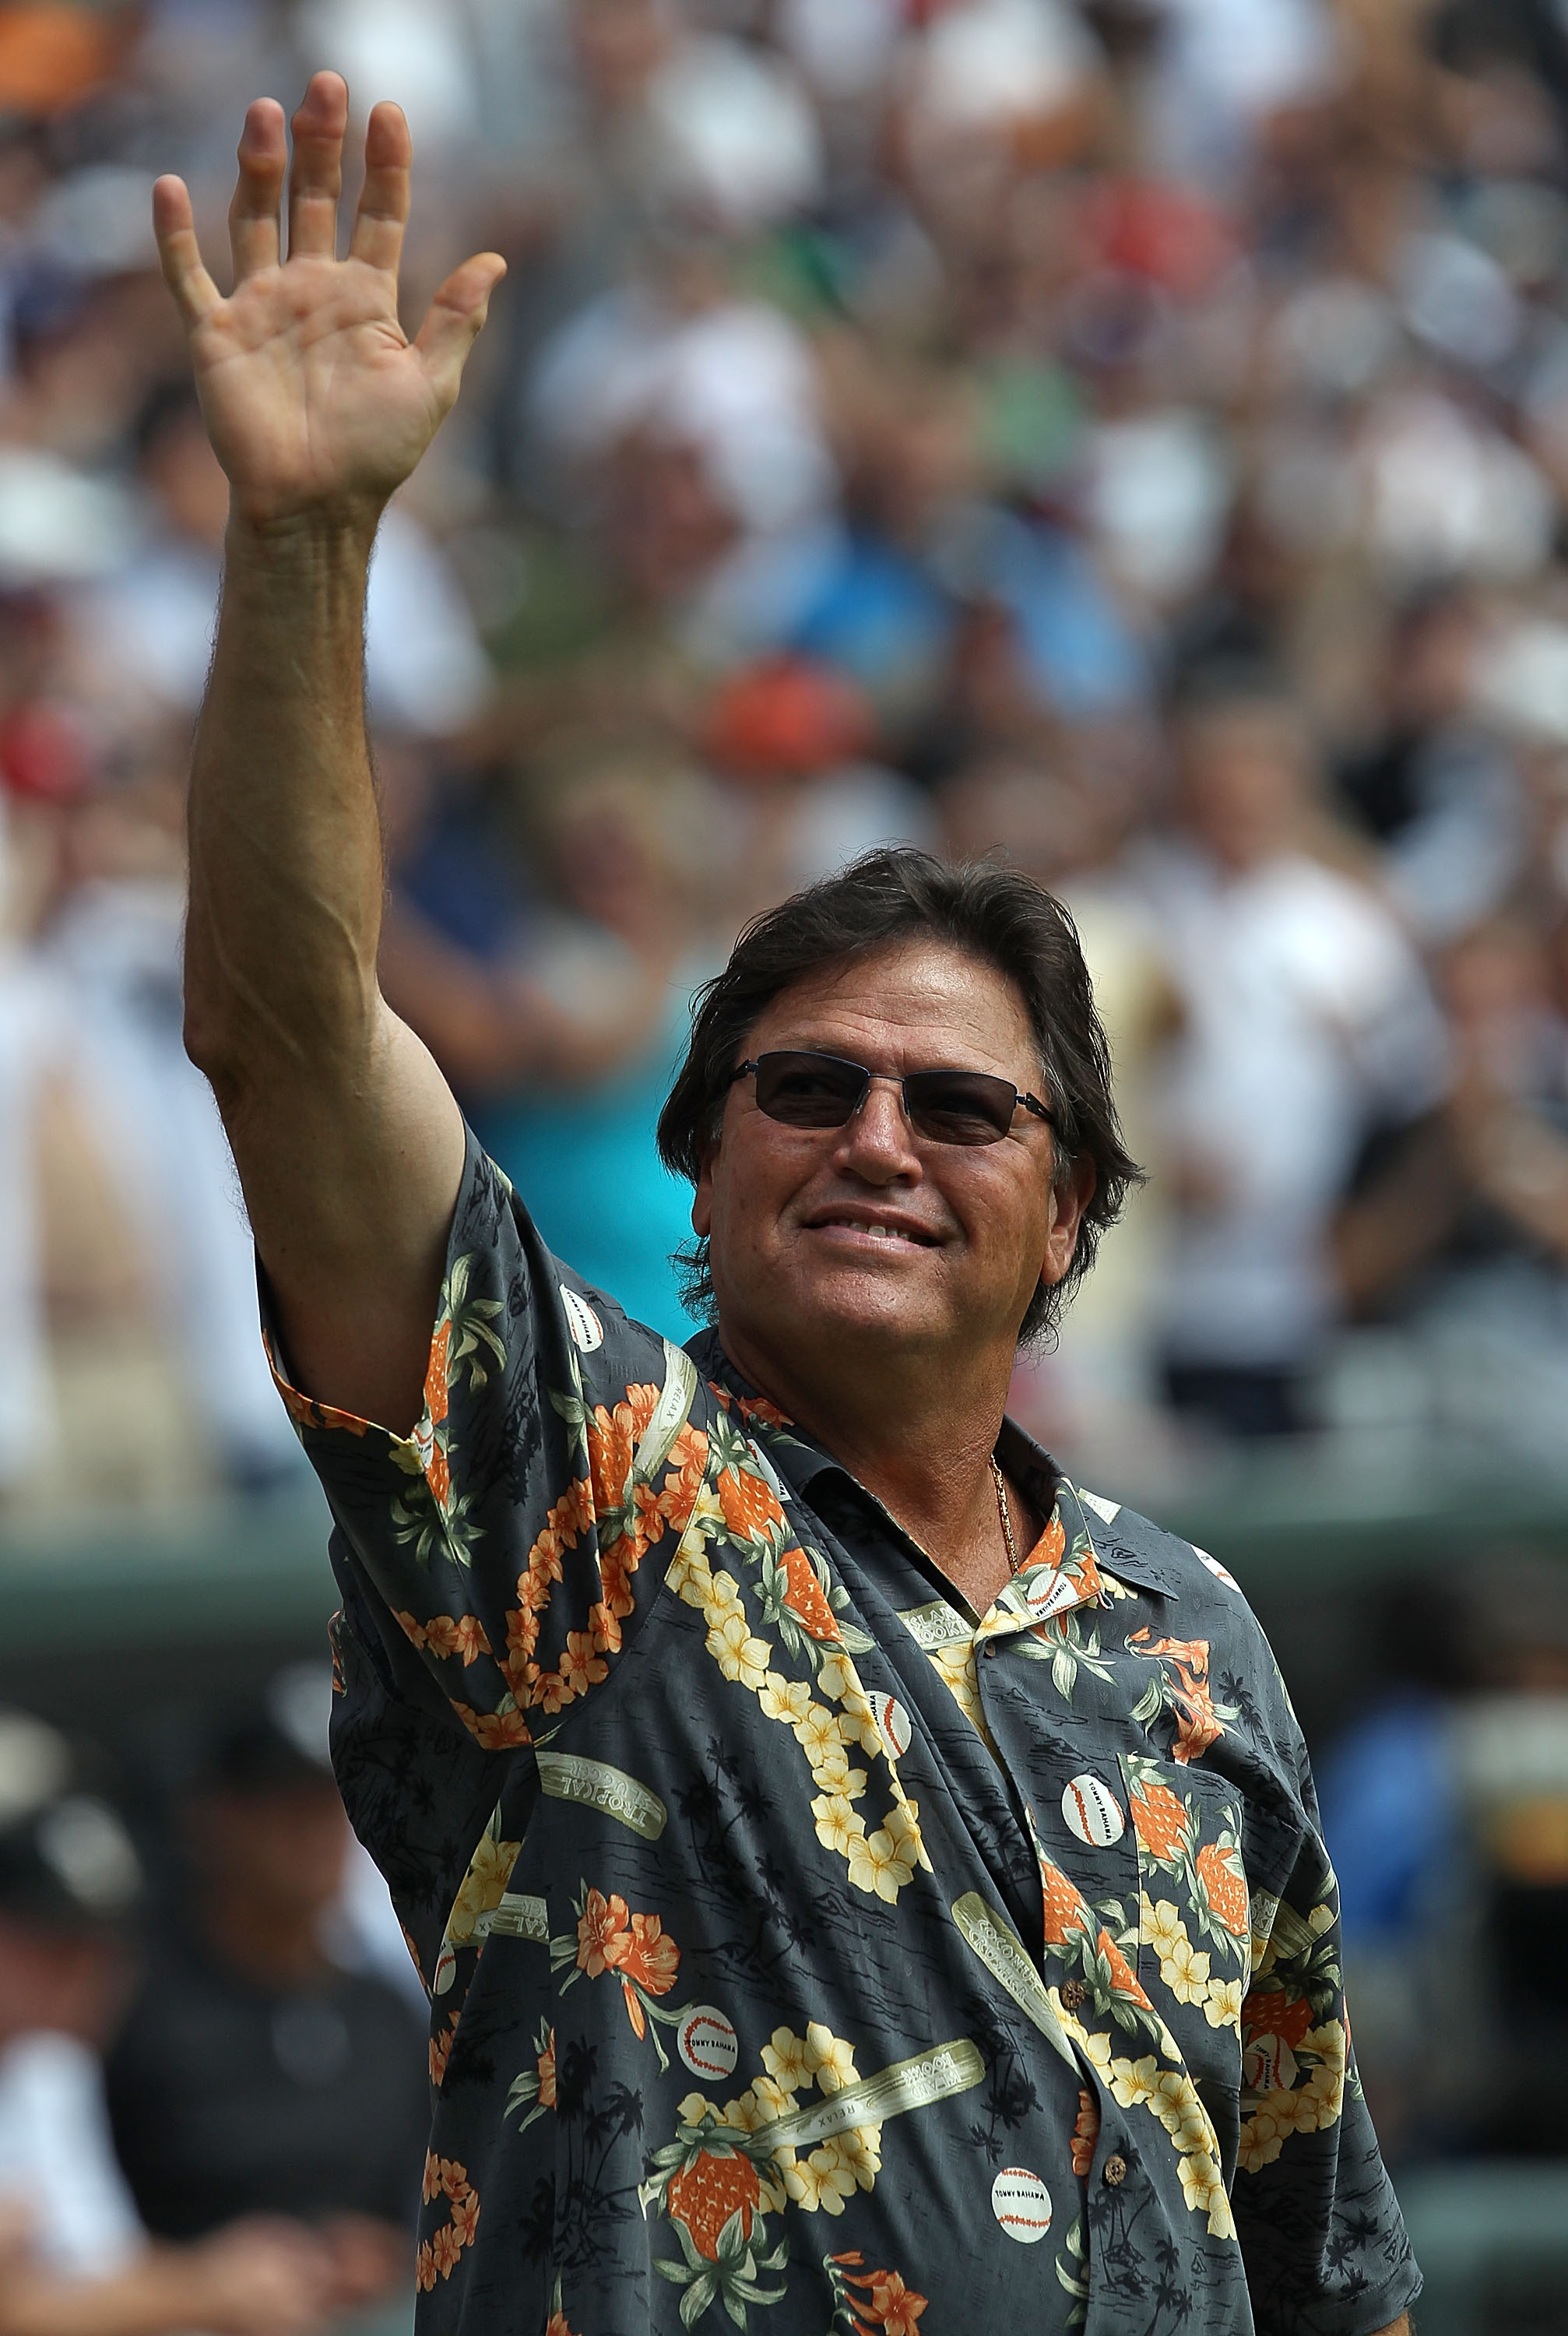 CHICAGO - AUGUST 29: Former player Carlton Fisk of the Chicago White Sox waves to the crowd during a ceremony retiring former slugger Frank Thomas' number 35 before a game against the New York Yankees at U.S. Cellular Field on August 29, 2010 in Chicago,